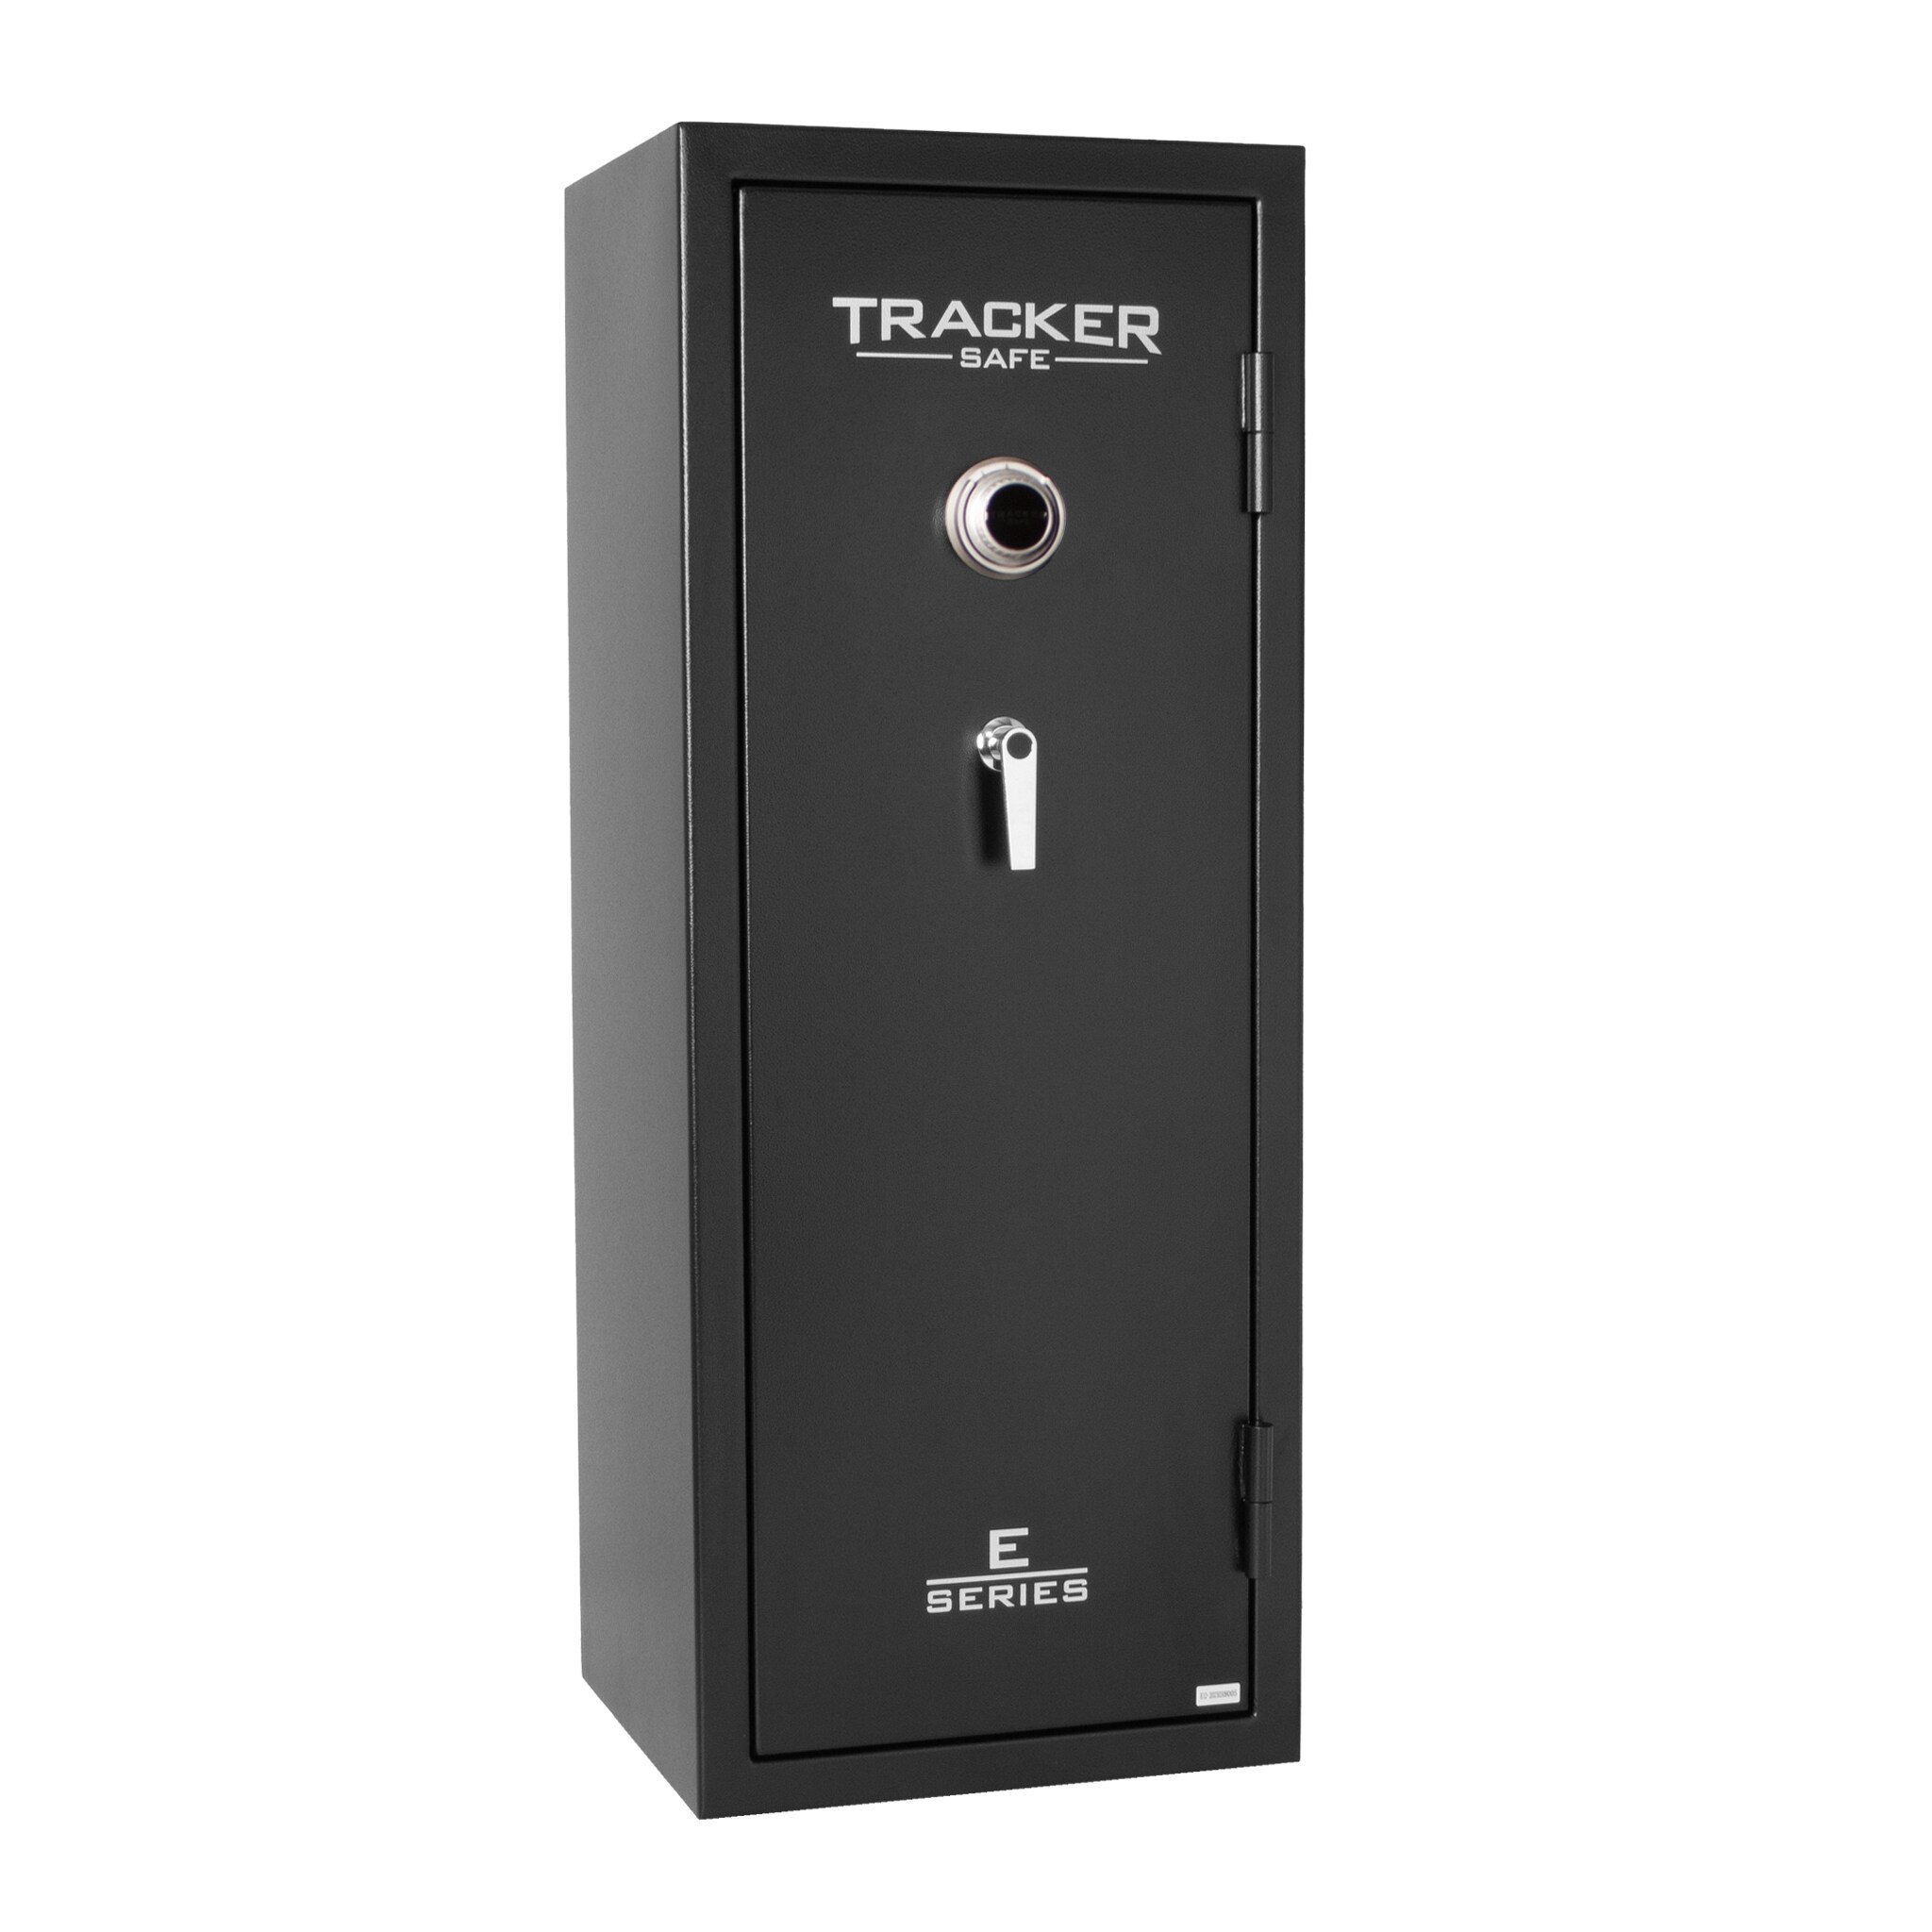 Gear Review: Gun Safe Wasted Space 